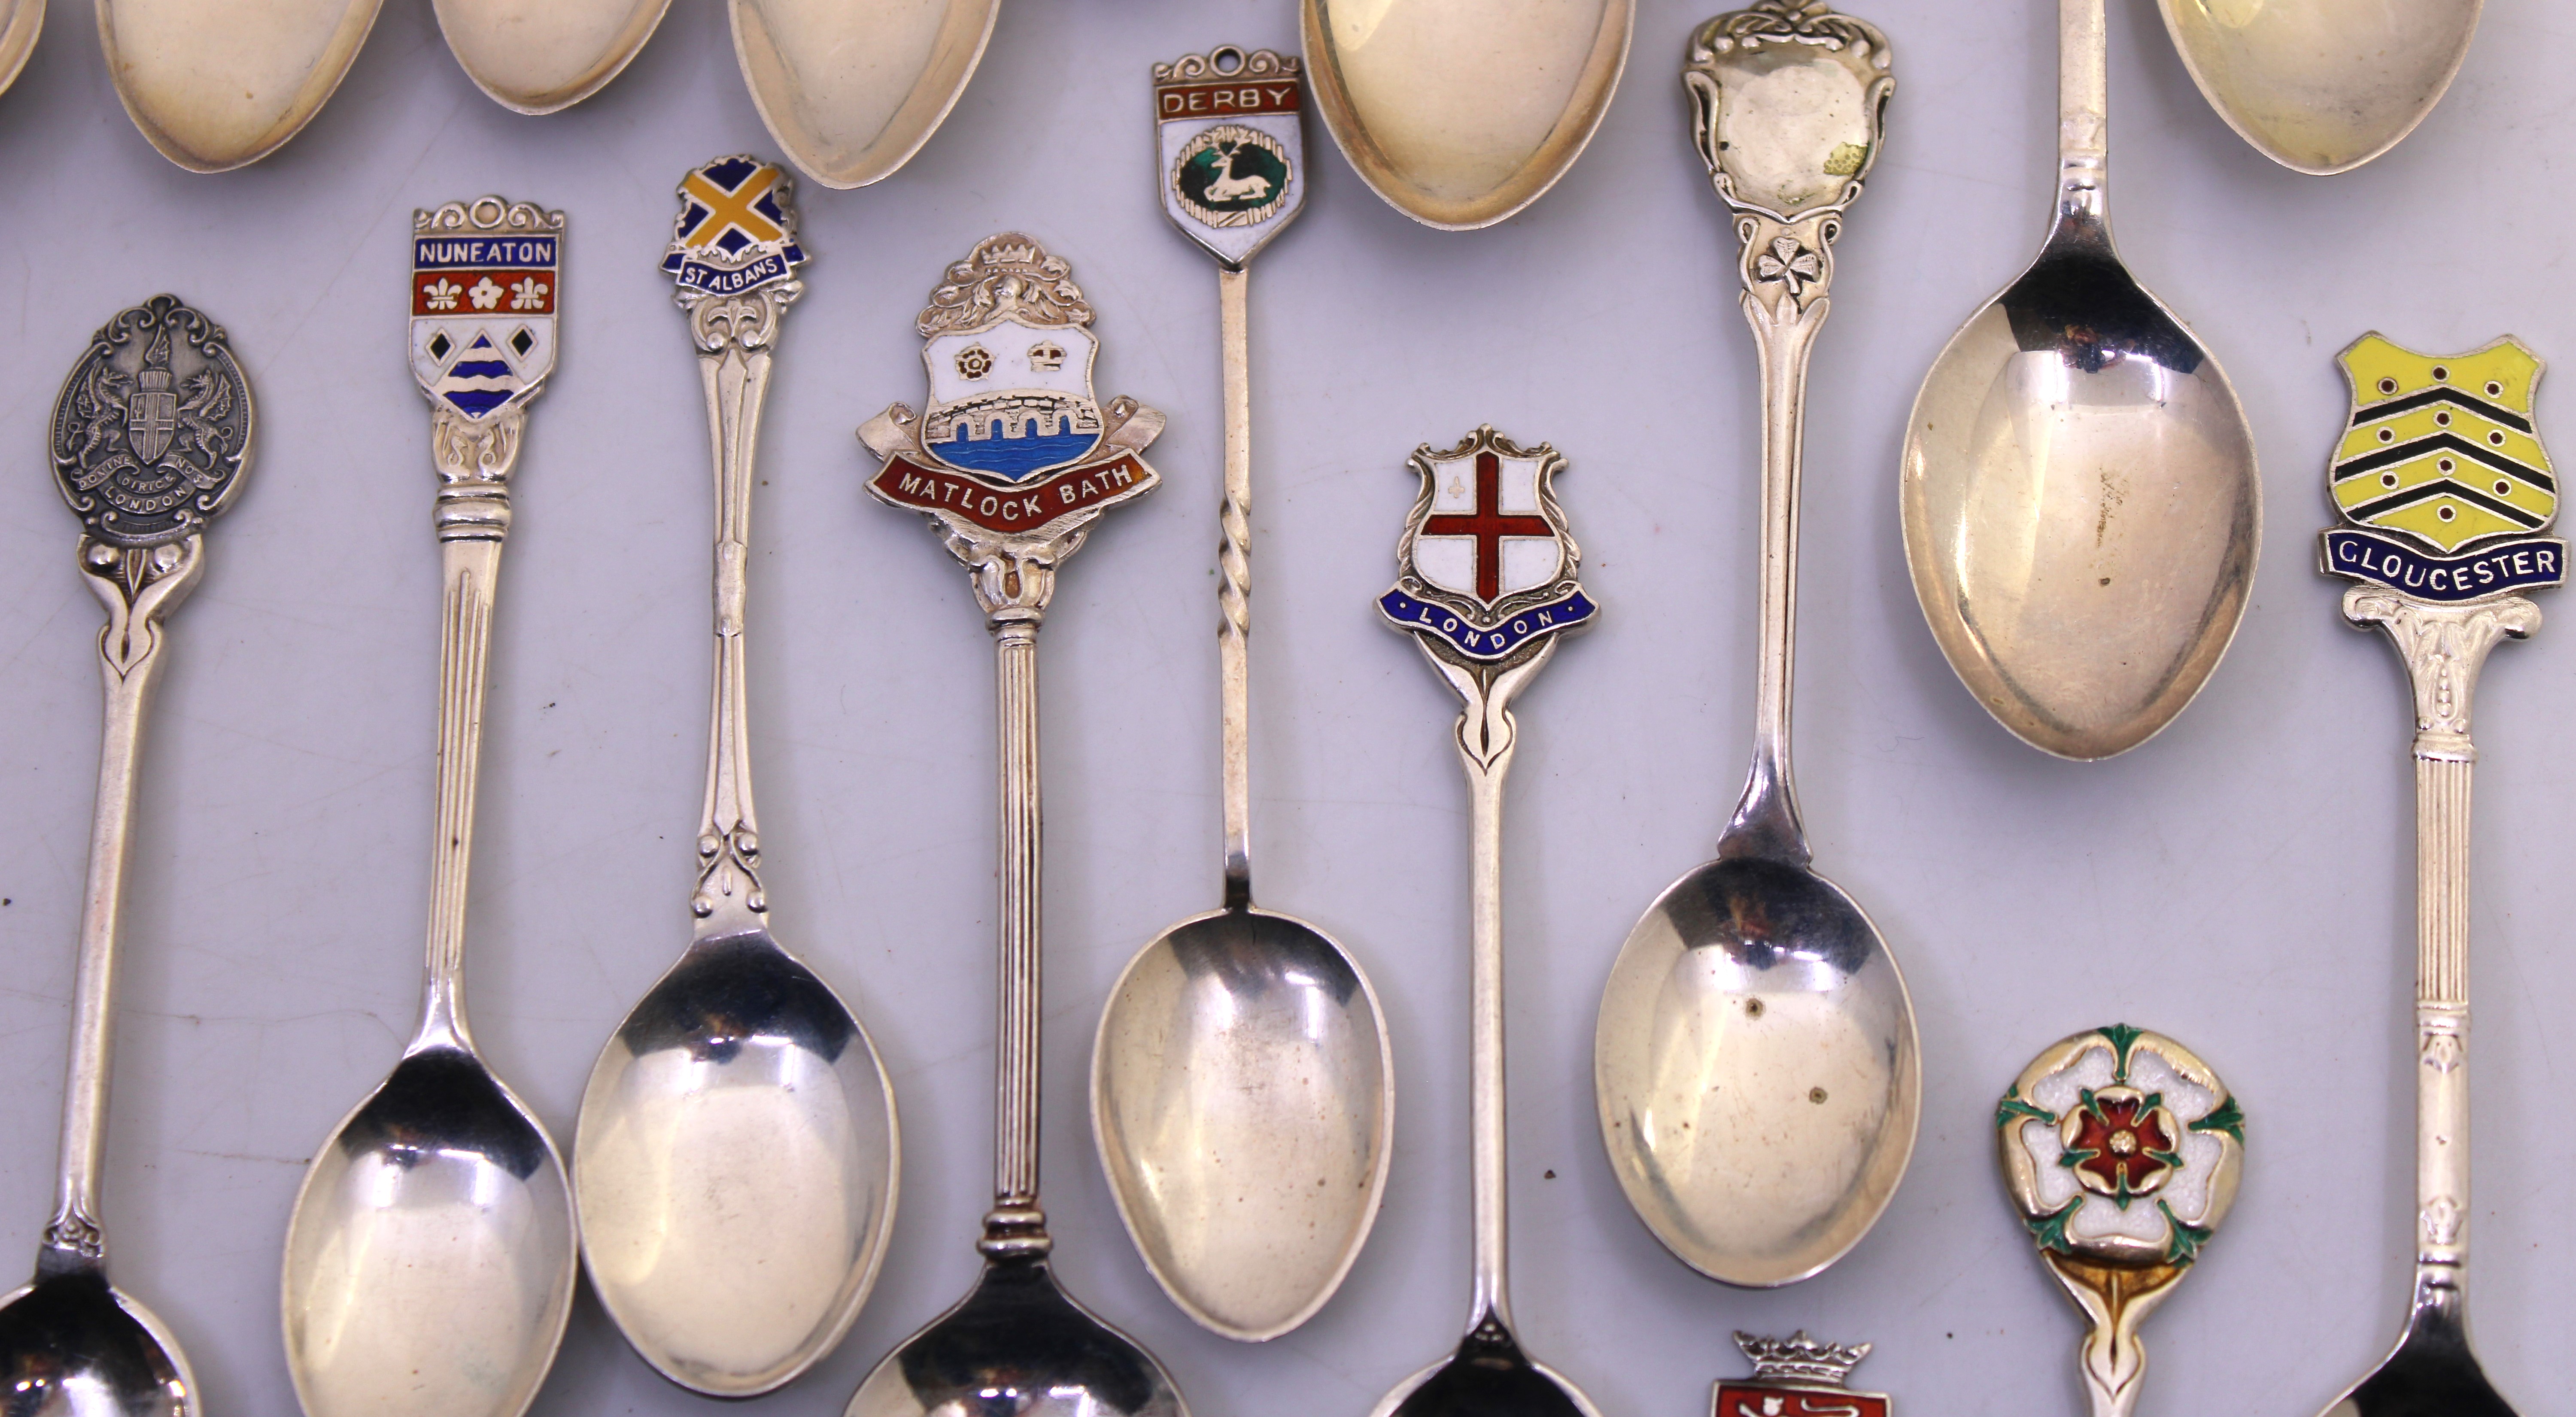 Selection of Sterling Silver Crested Teaspoons, EPNS Teaspoons, Commemorative Coins and a - Image 4 of 7